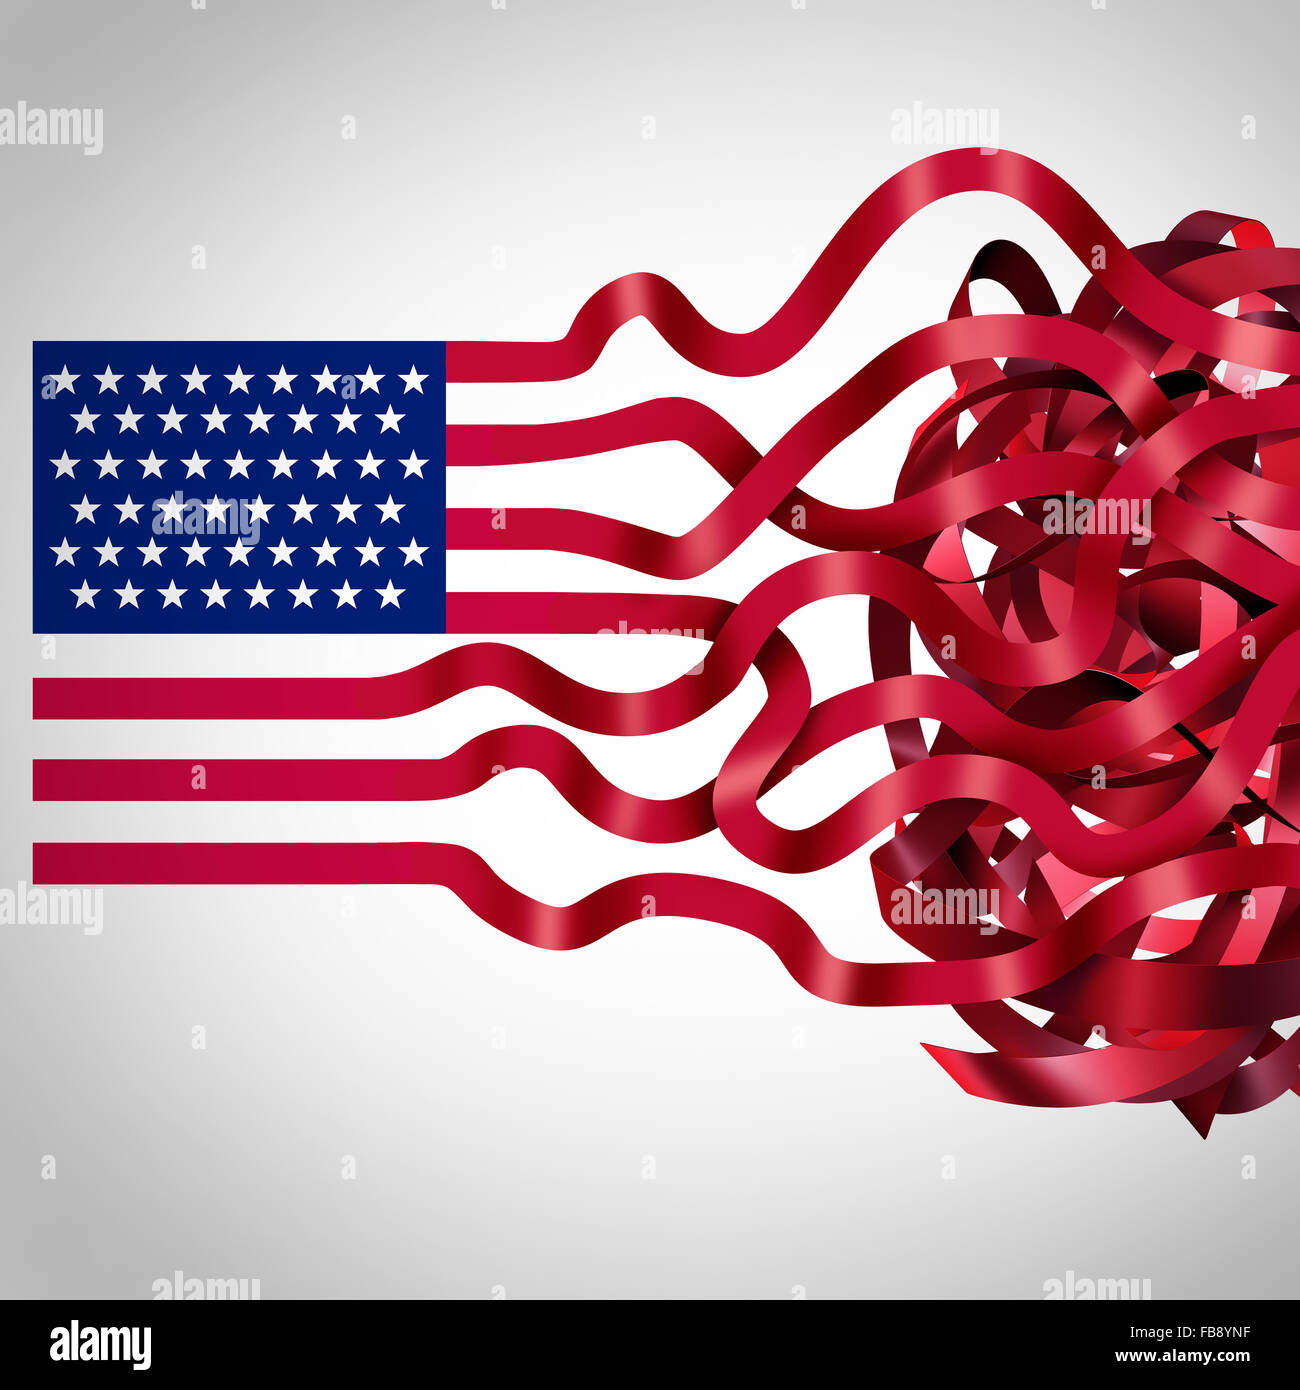 Government red tape concept and American bureaucracy symbol as an icon of the flag of the United States with the red stripes getting tangled in confusion as a metaphor for political and administration inefficiency. Stock Photo